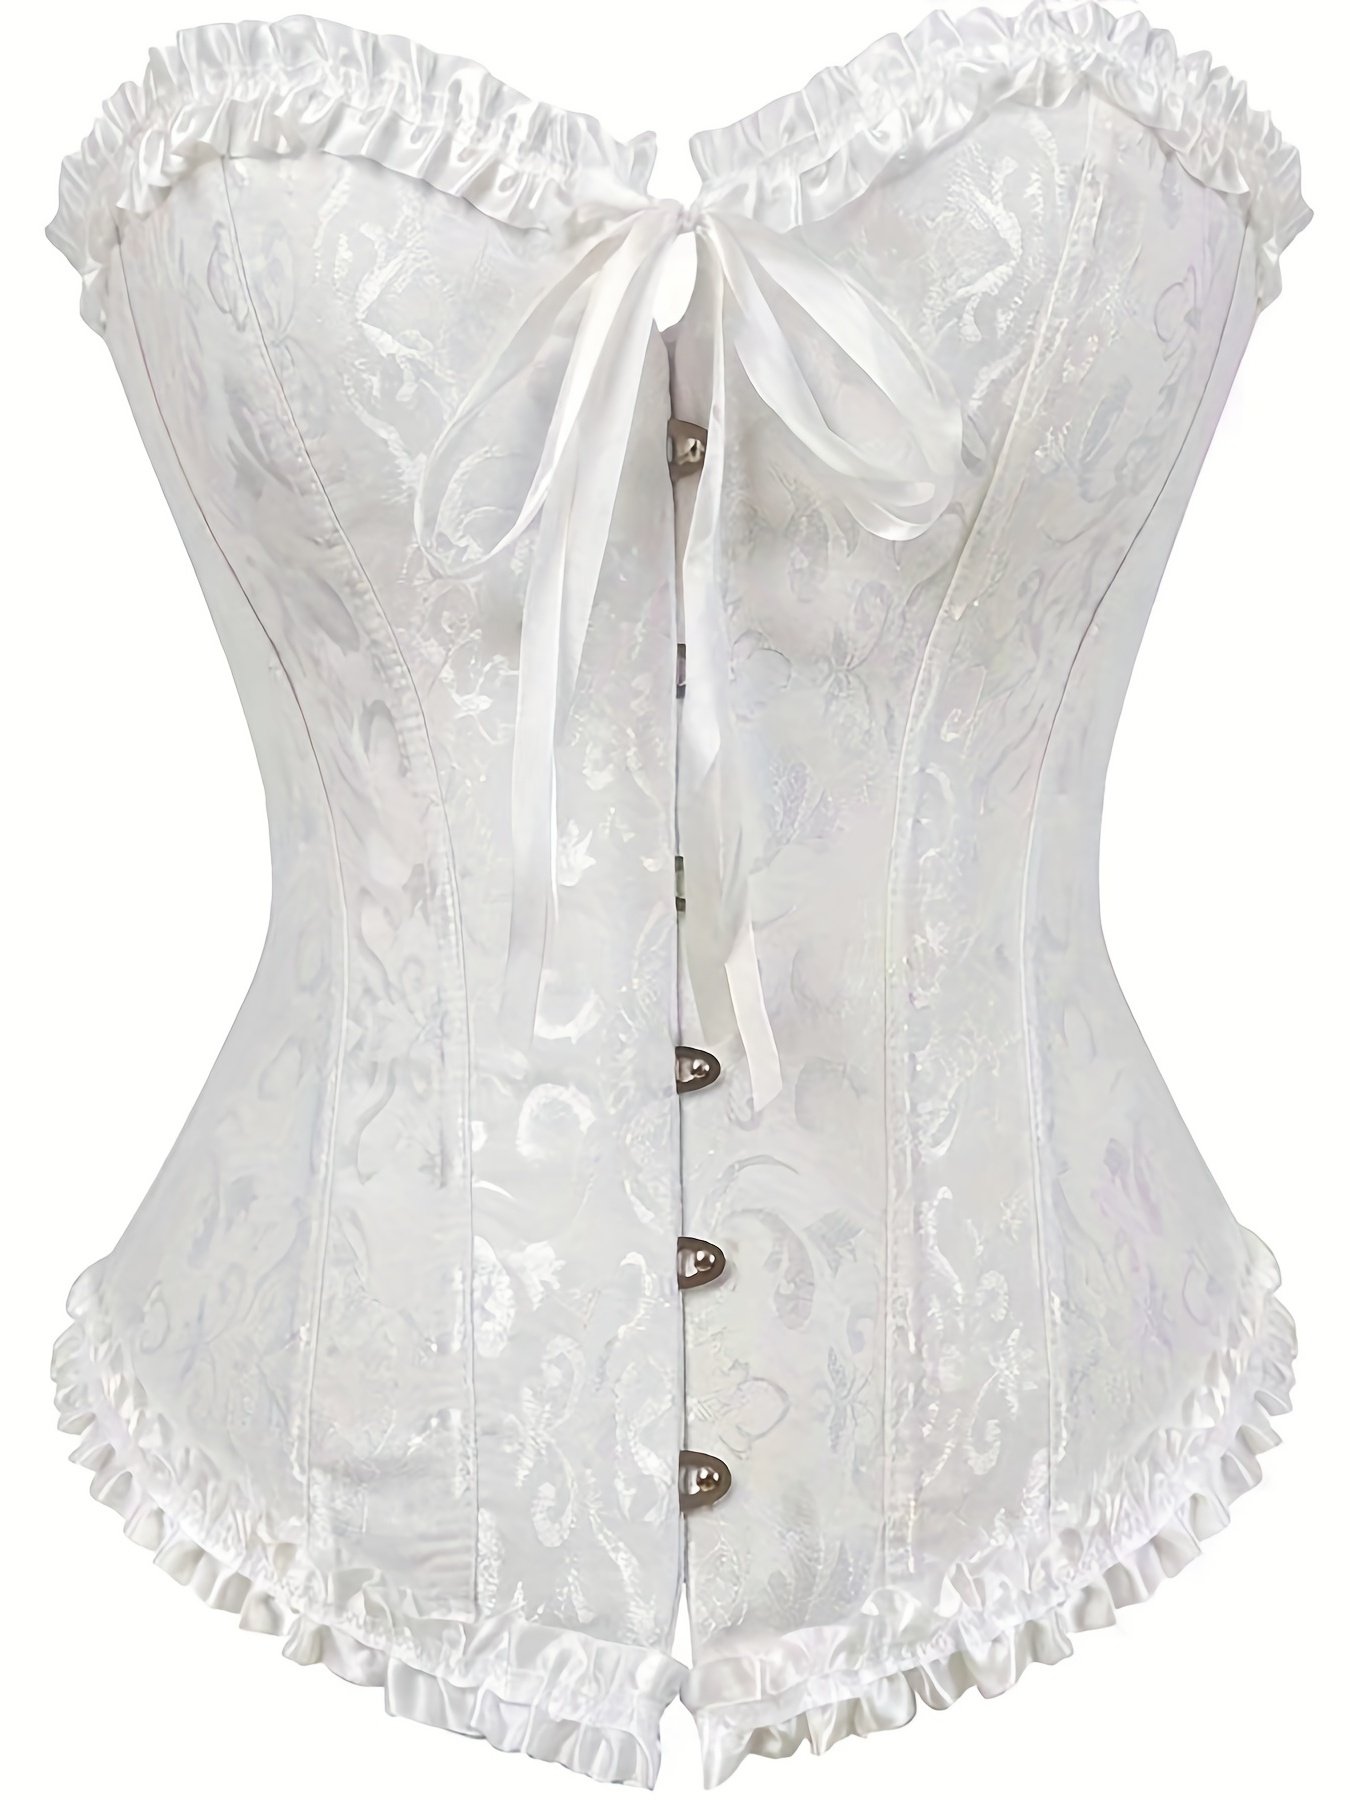 Light Milk Mesh Corset Top Transparent With Satin Cups Laced up Waist  Trainer Slimming Body Shaper Corset -  Canada